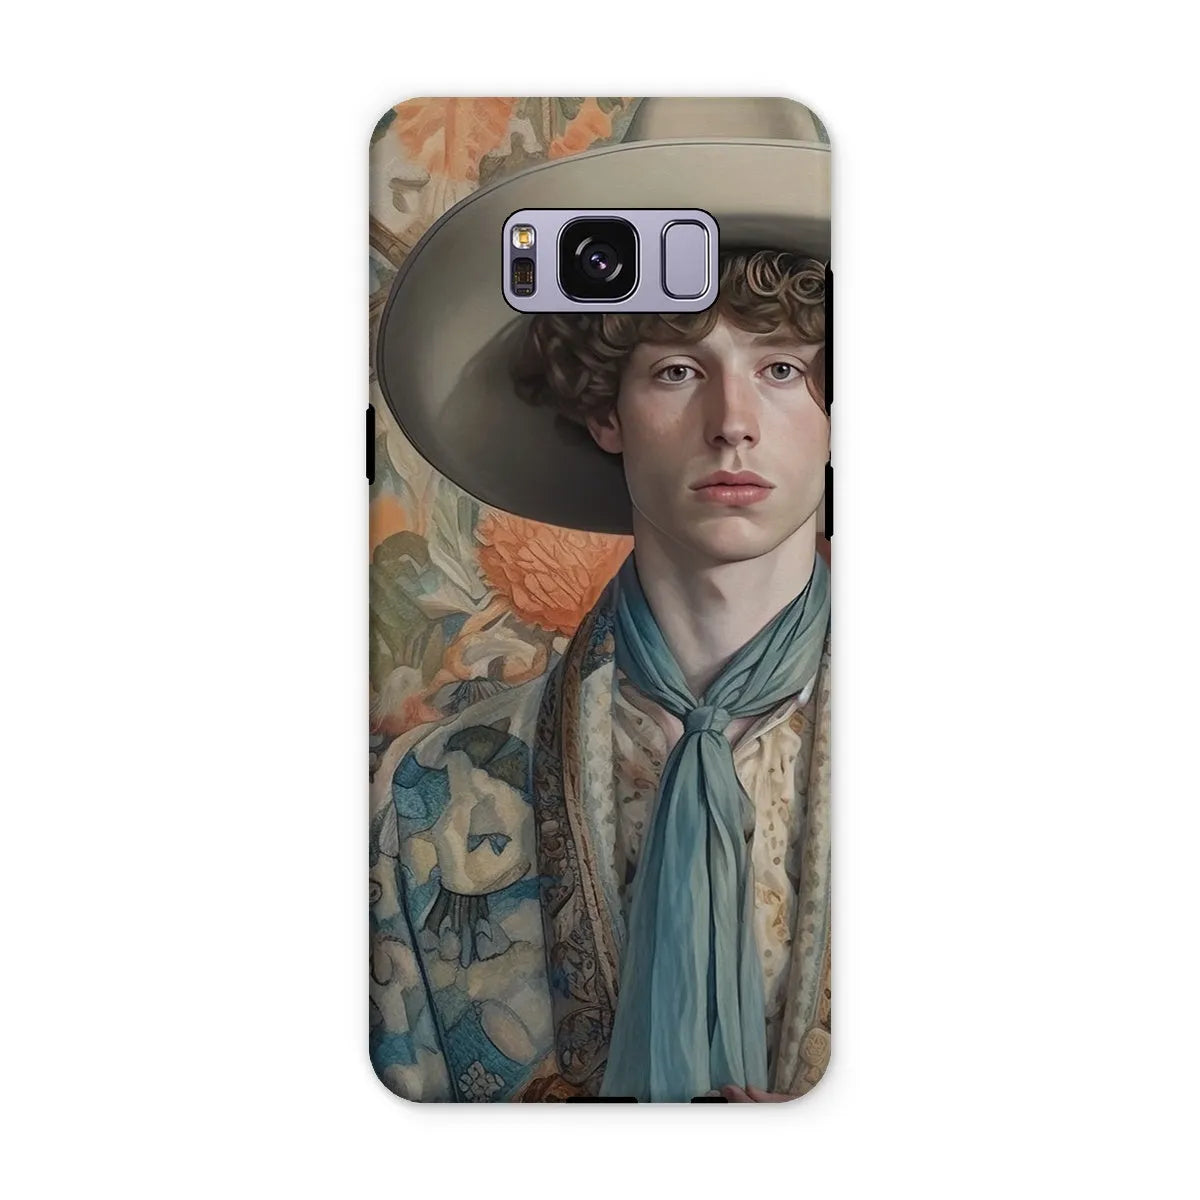 Theodore The Gay Cowboy - Dandy Gay Men Art Phone Case - Samsung Galaxy S8 Plus / Matte - Mobile Phone Cases